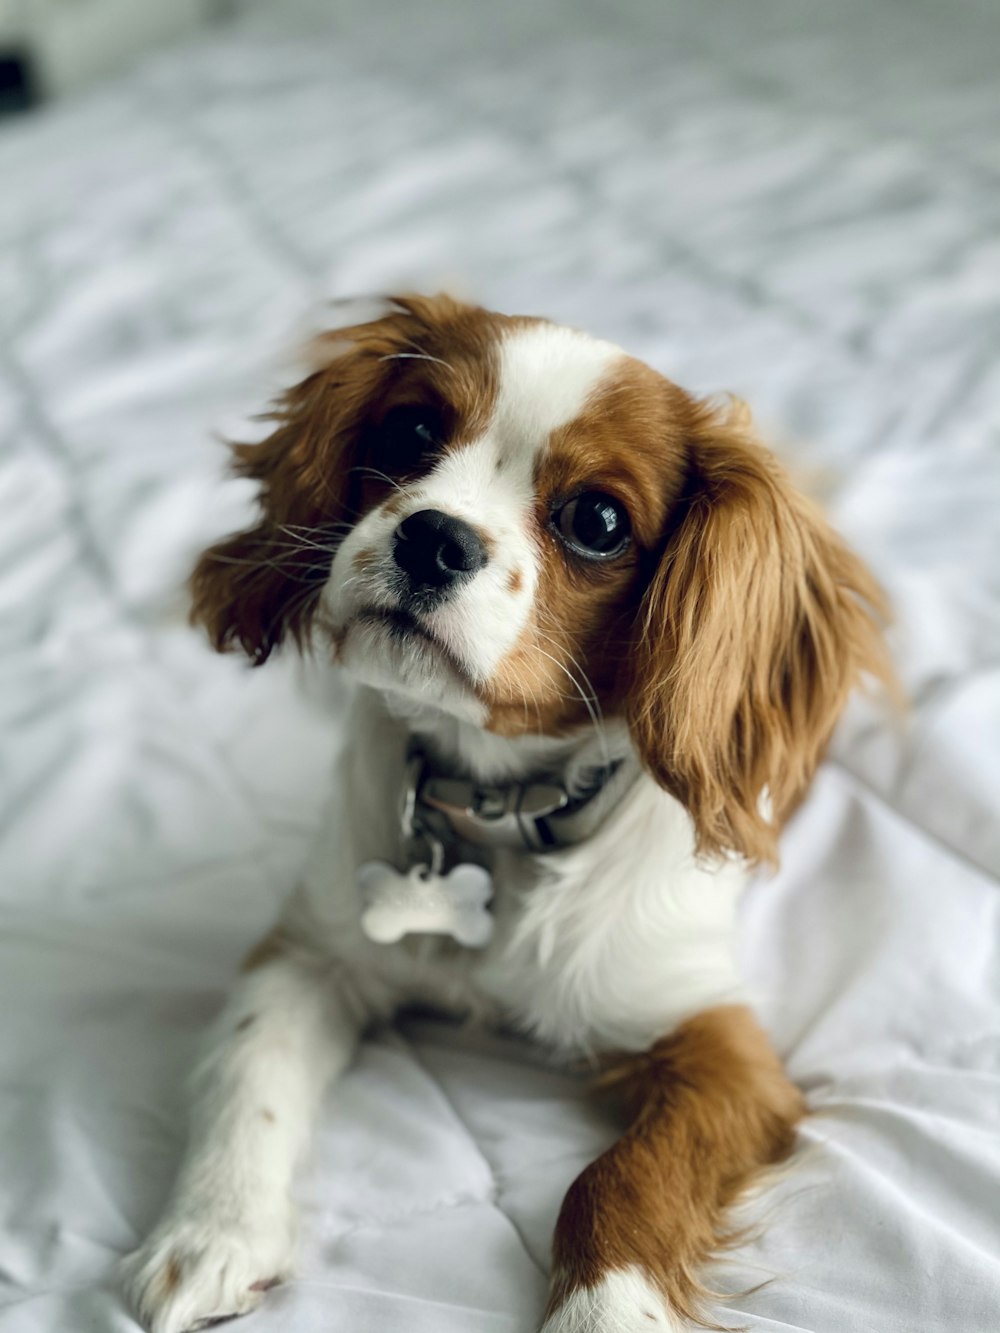 brown and white long haired small dog on white textile photo – Free Puppy  Image on Unsplash